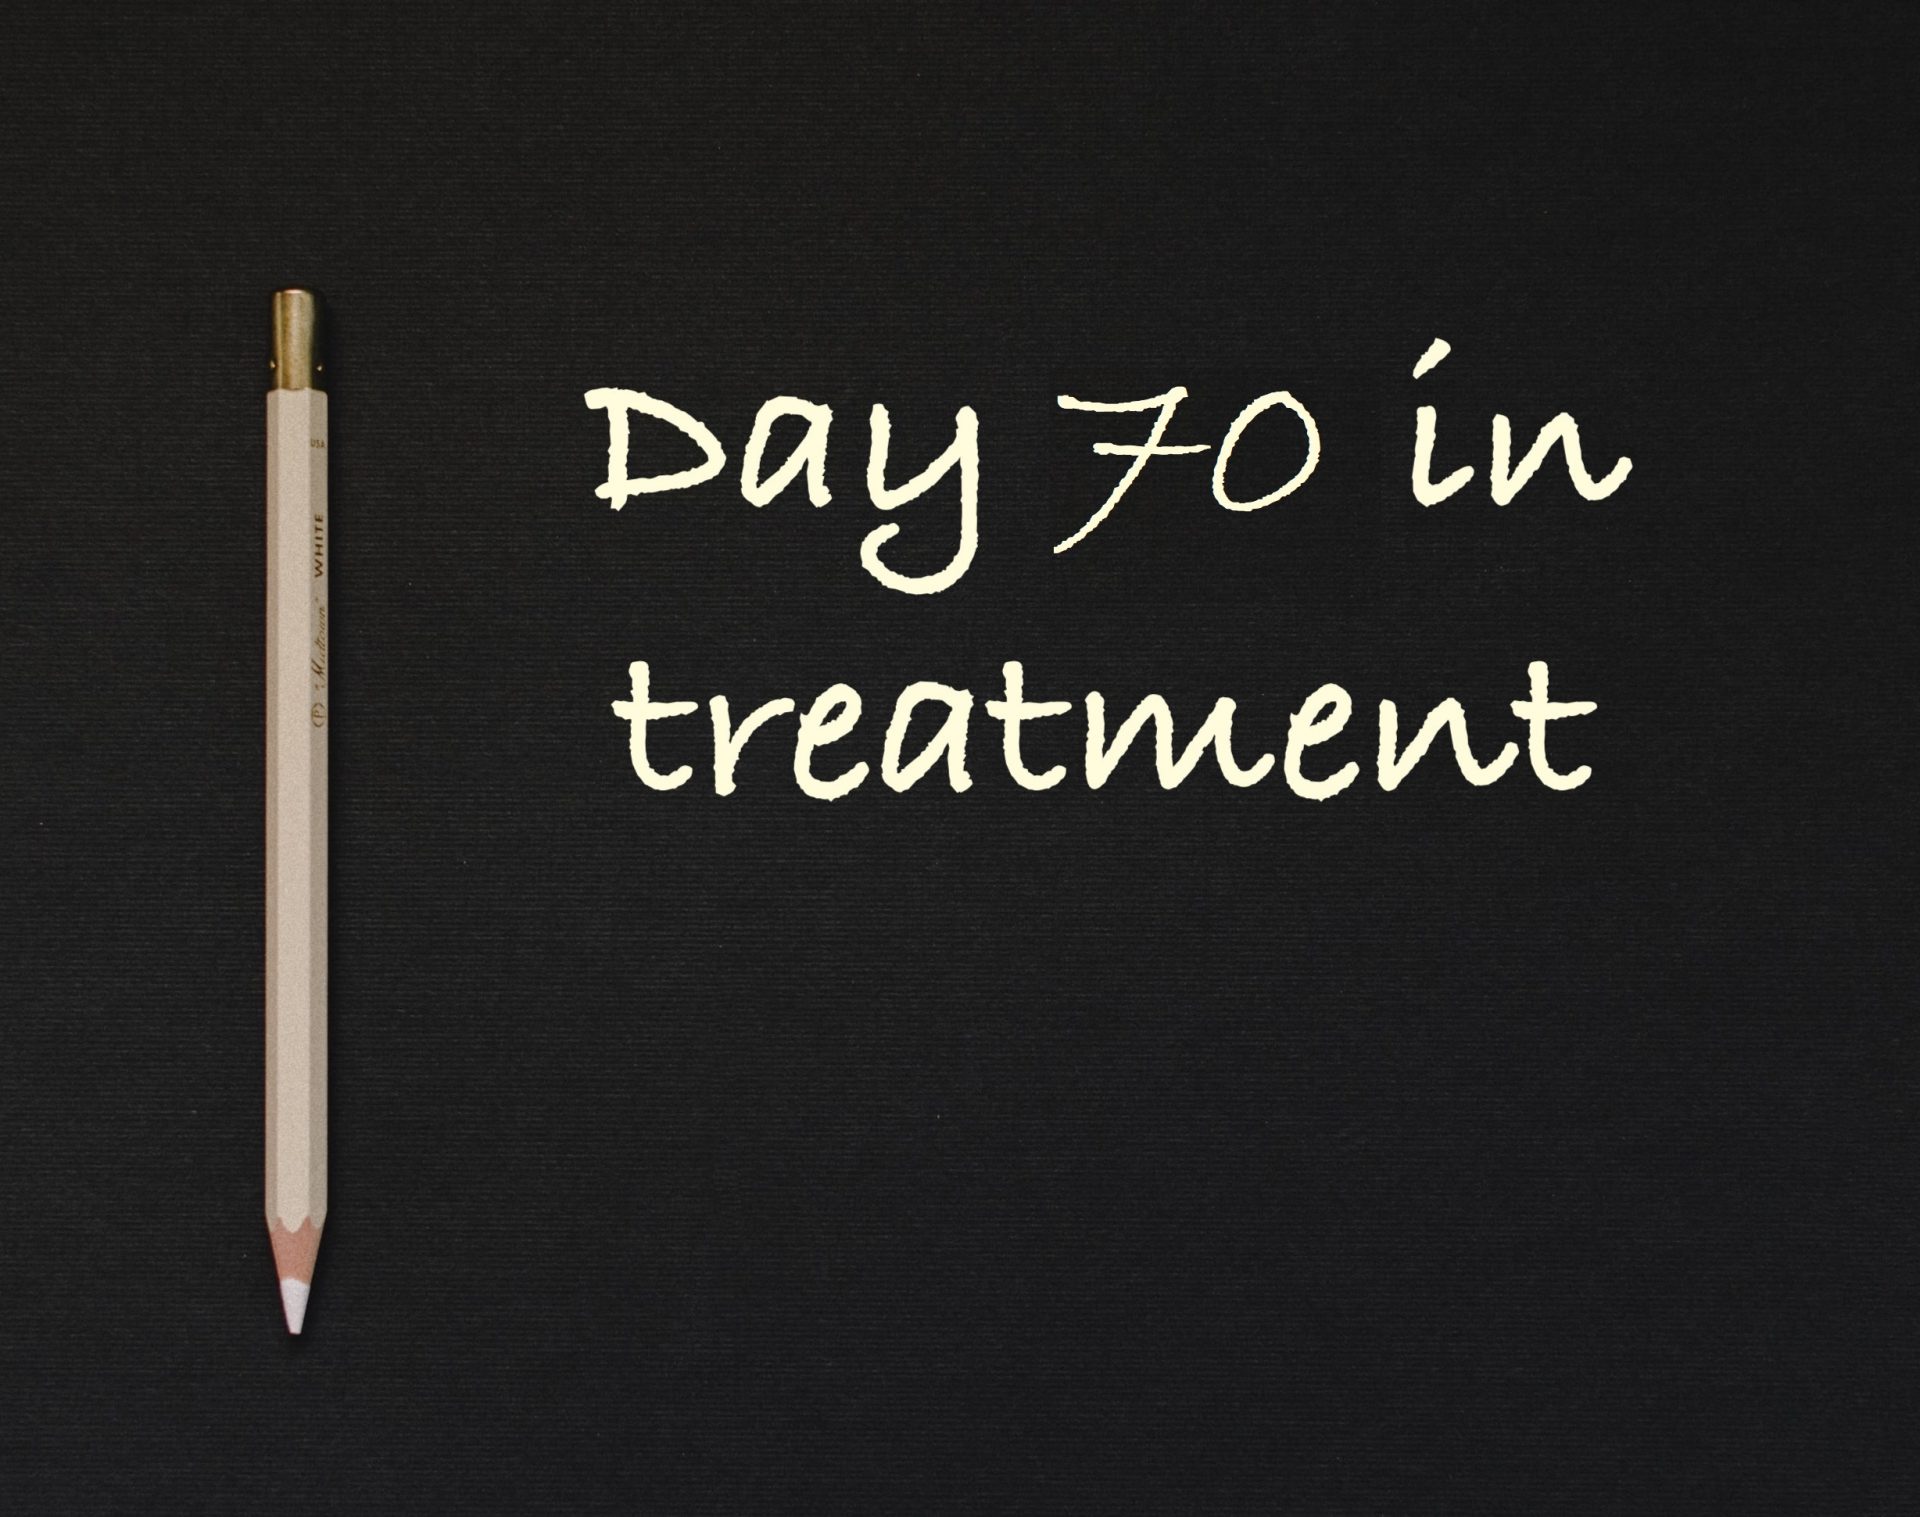 Day 70 in treatment